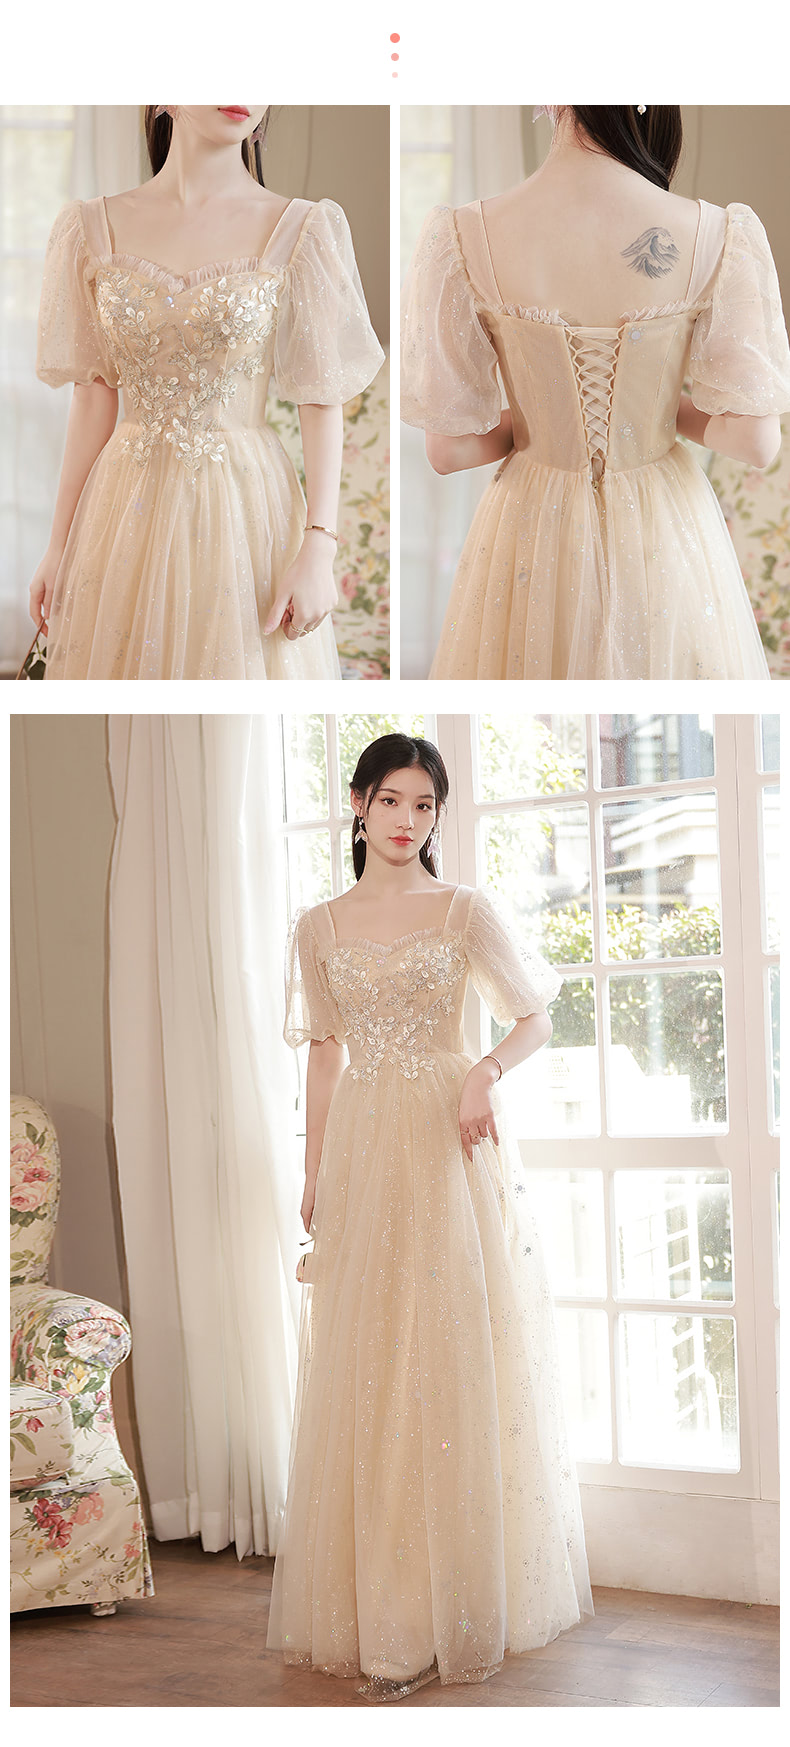 Charming-Embroidery-Bridesmaid-Dress-Banquet-Party-Ball-Gown23